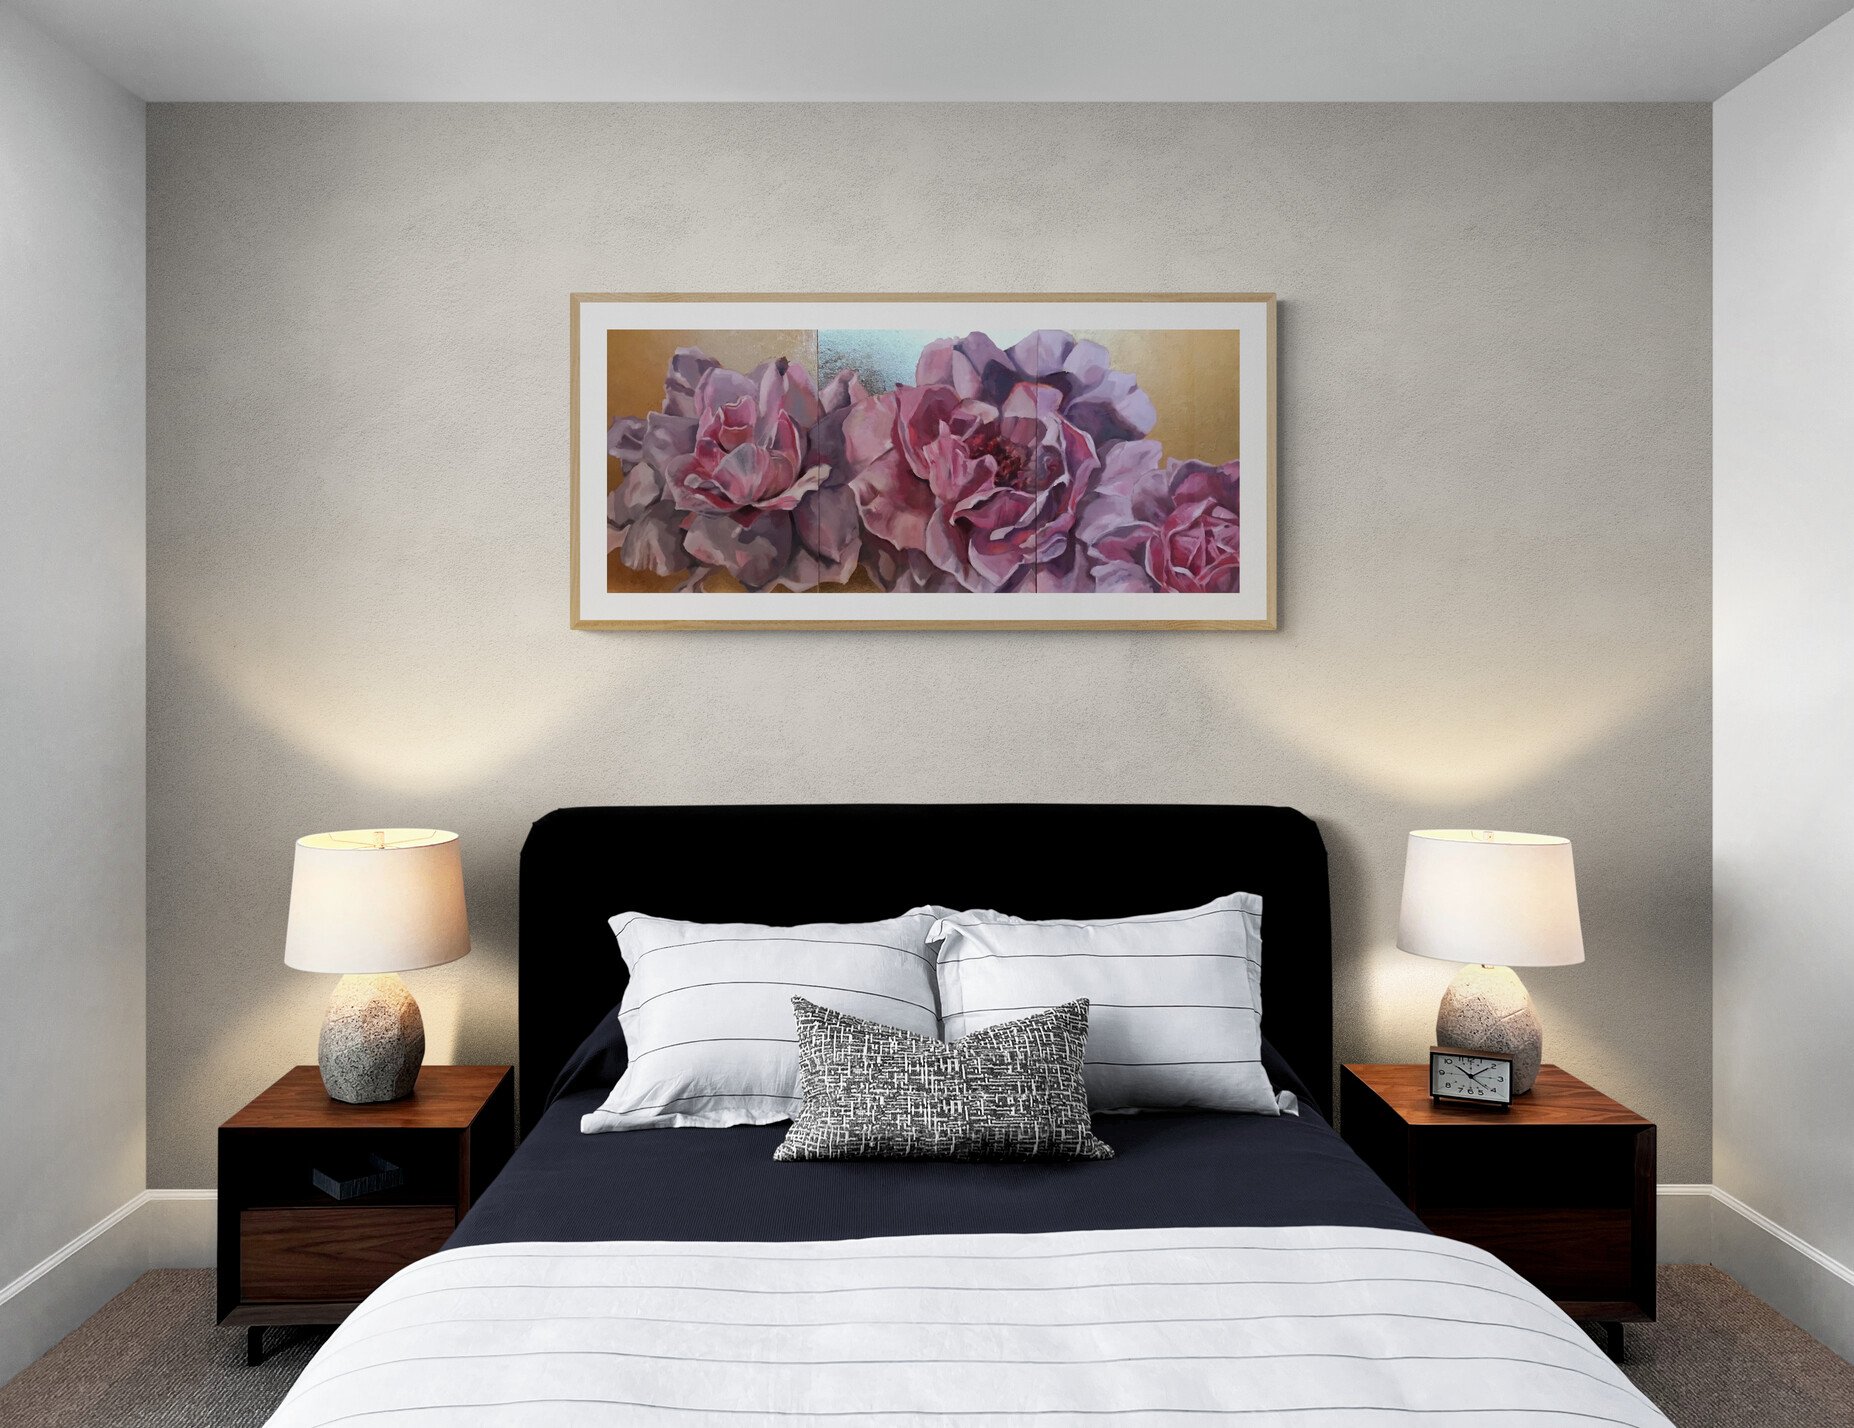 Roses Triptych in Bedroom